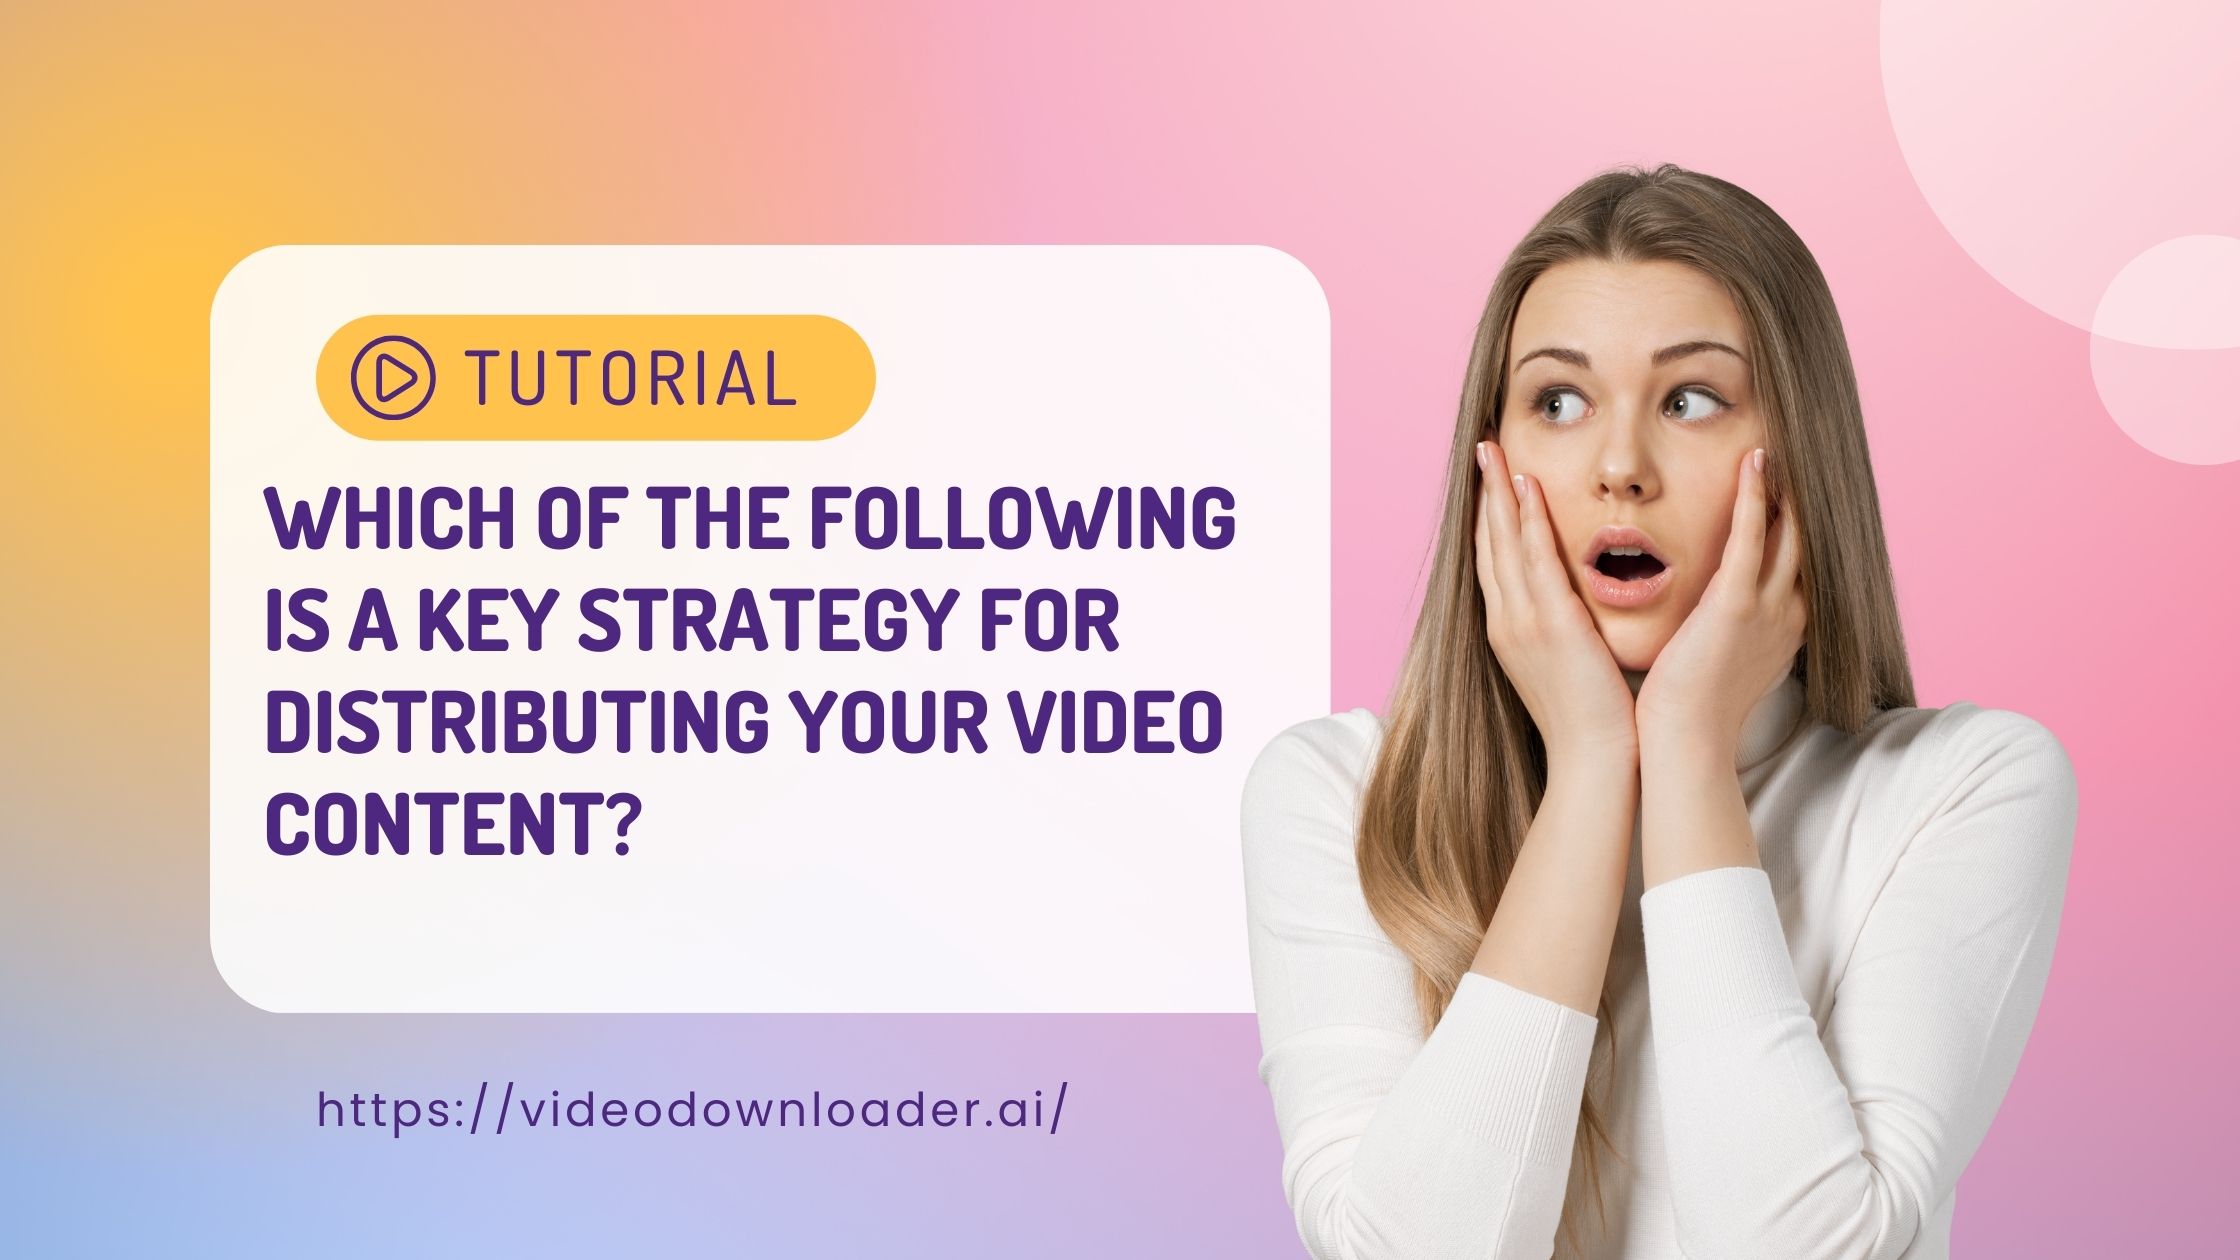 Which of the following is a key strategy for distributing your video content?